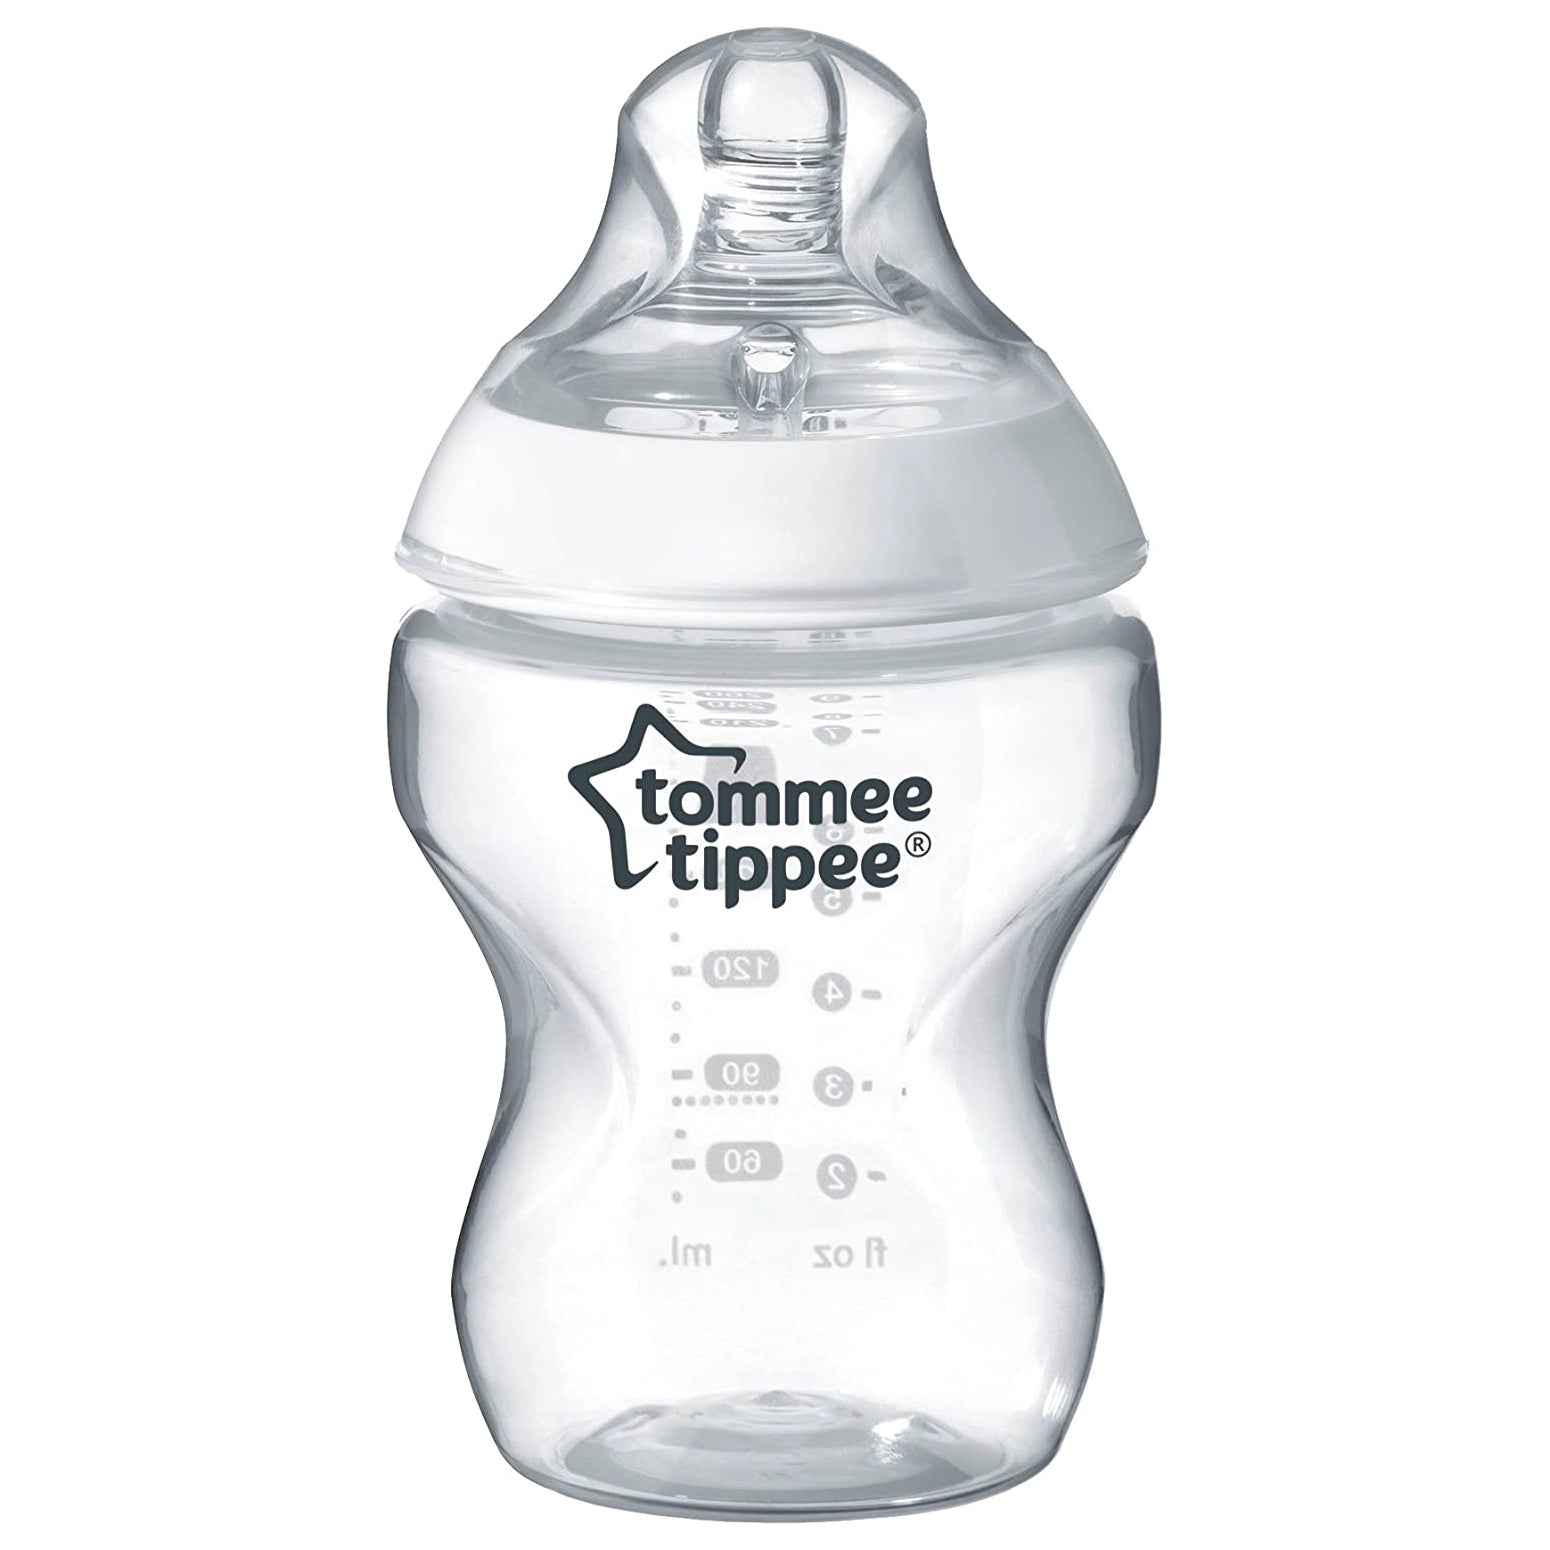 Tommee Tippee Closer to Nature Feeding Bottle, 260ml x 1 (Clear)